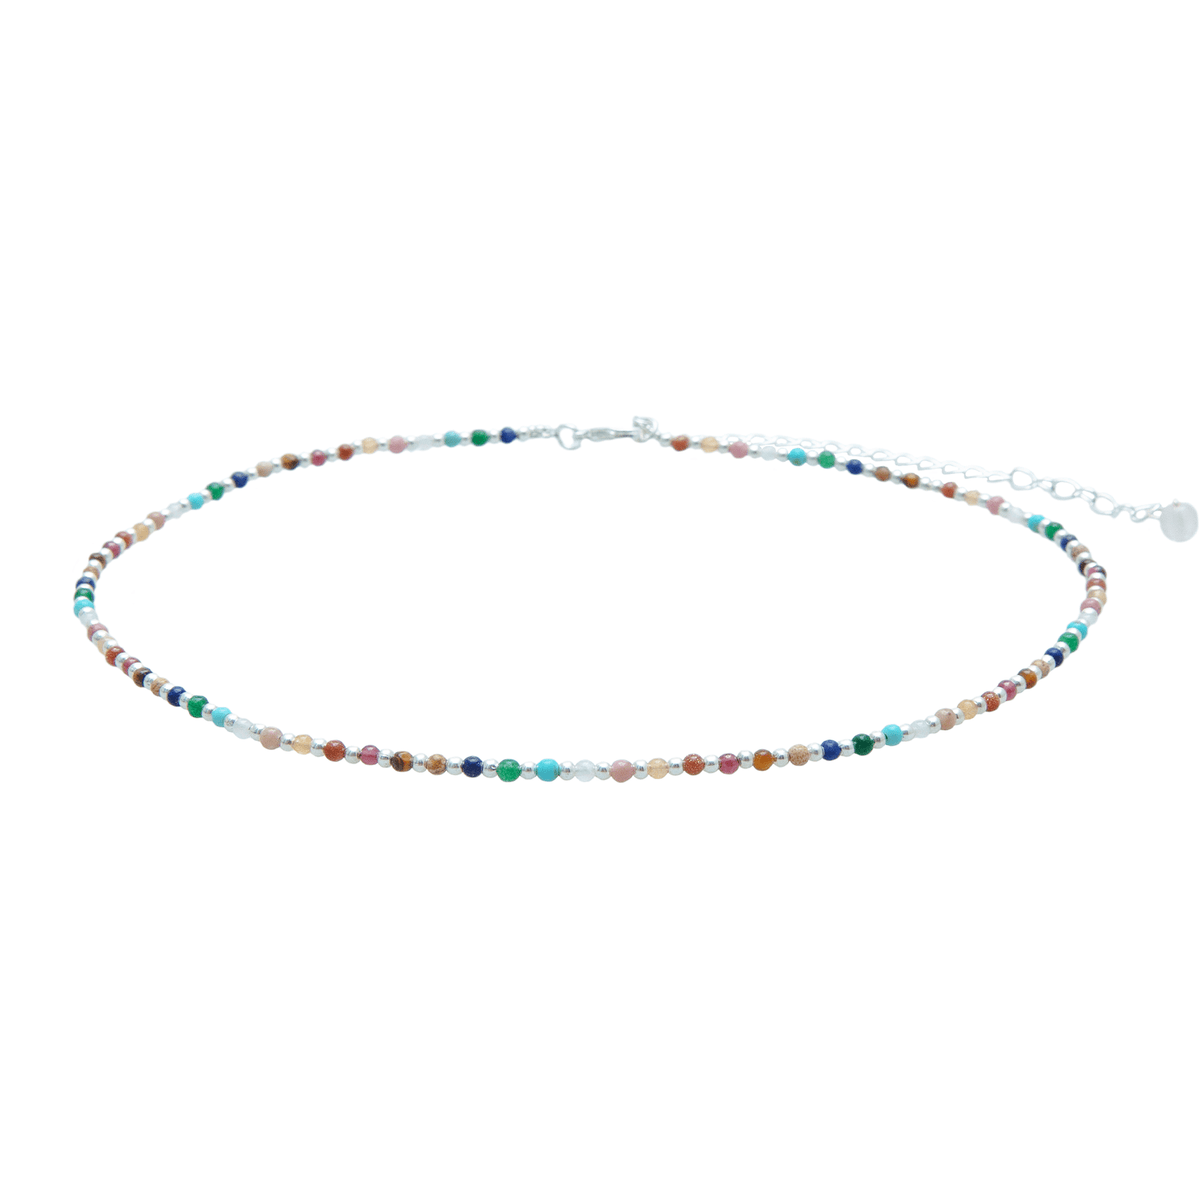 Dainty necklace with assorted multi-color stones and silver beads